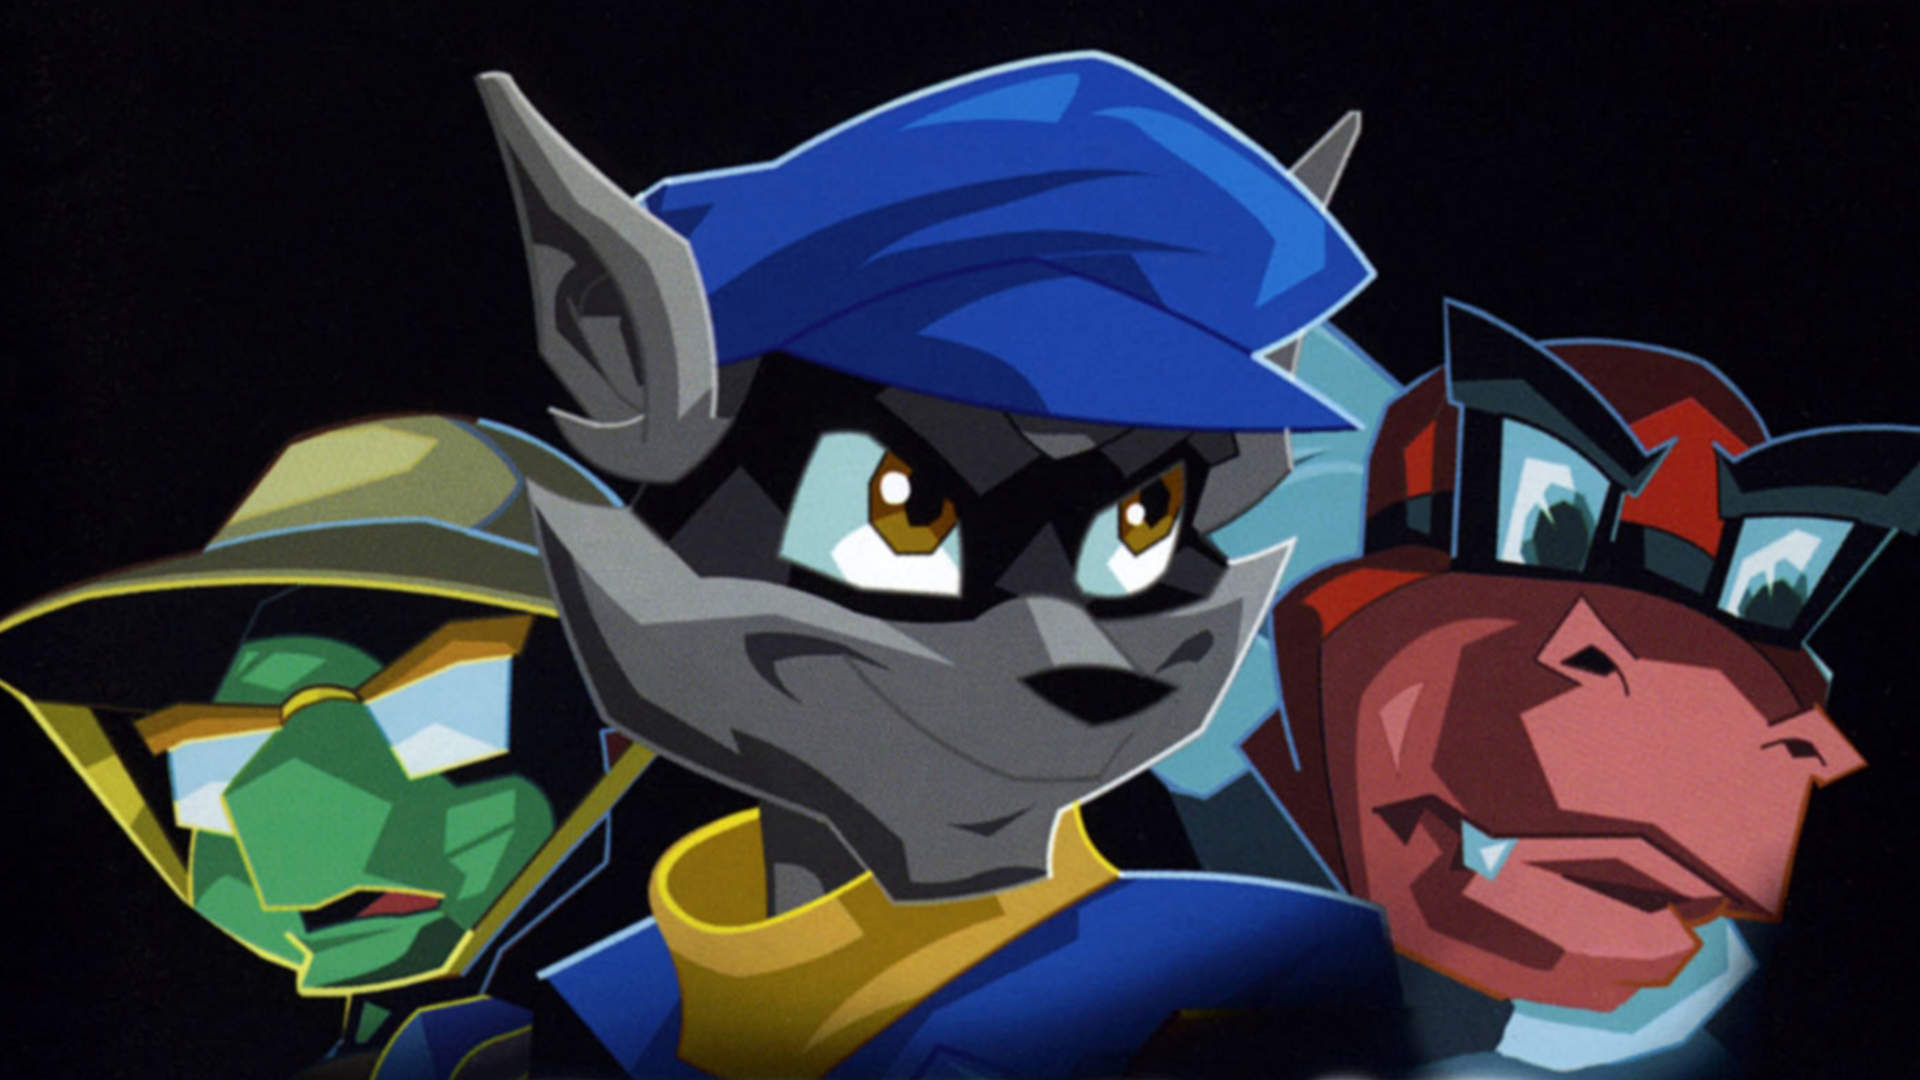 Trylogia Sly Cooper